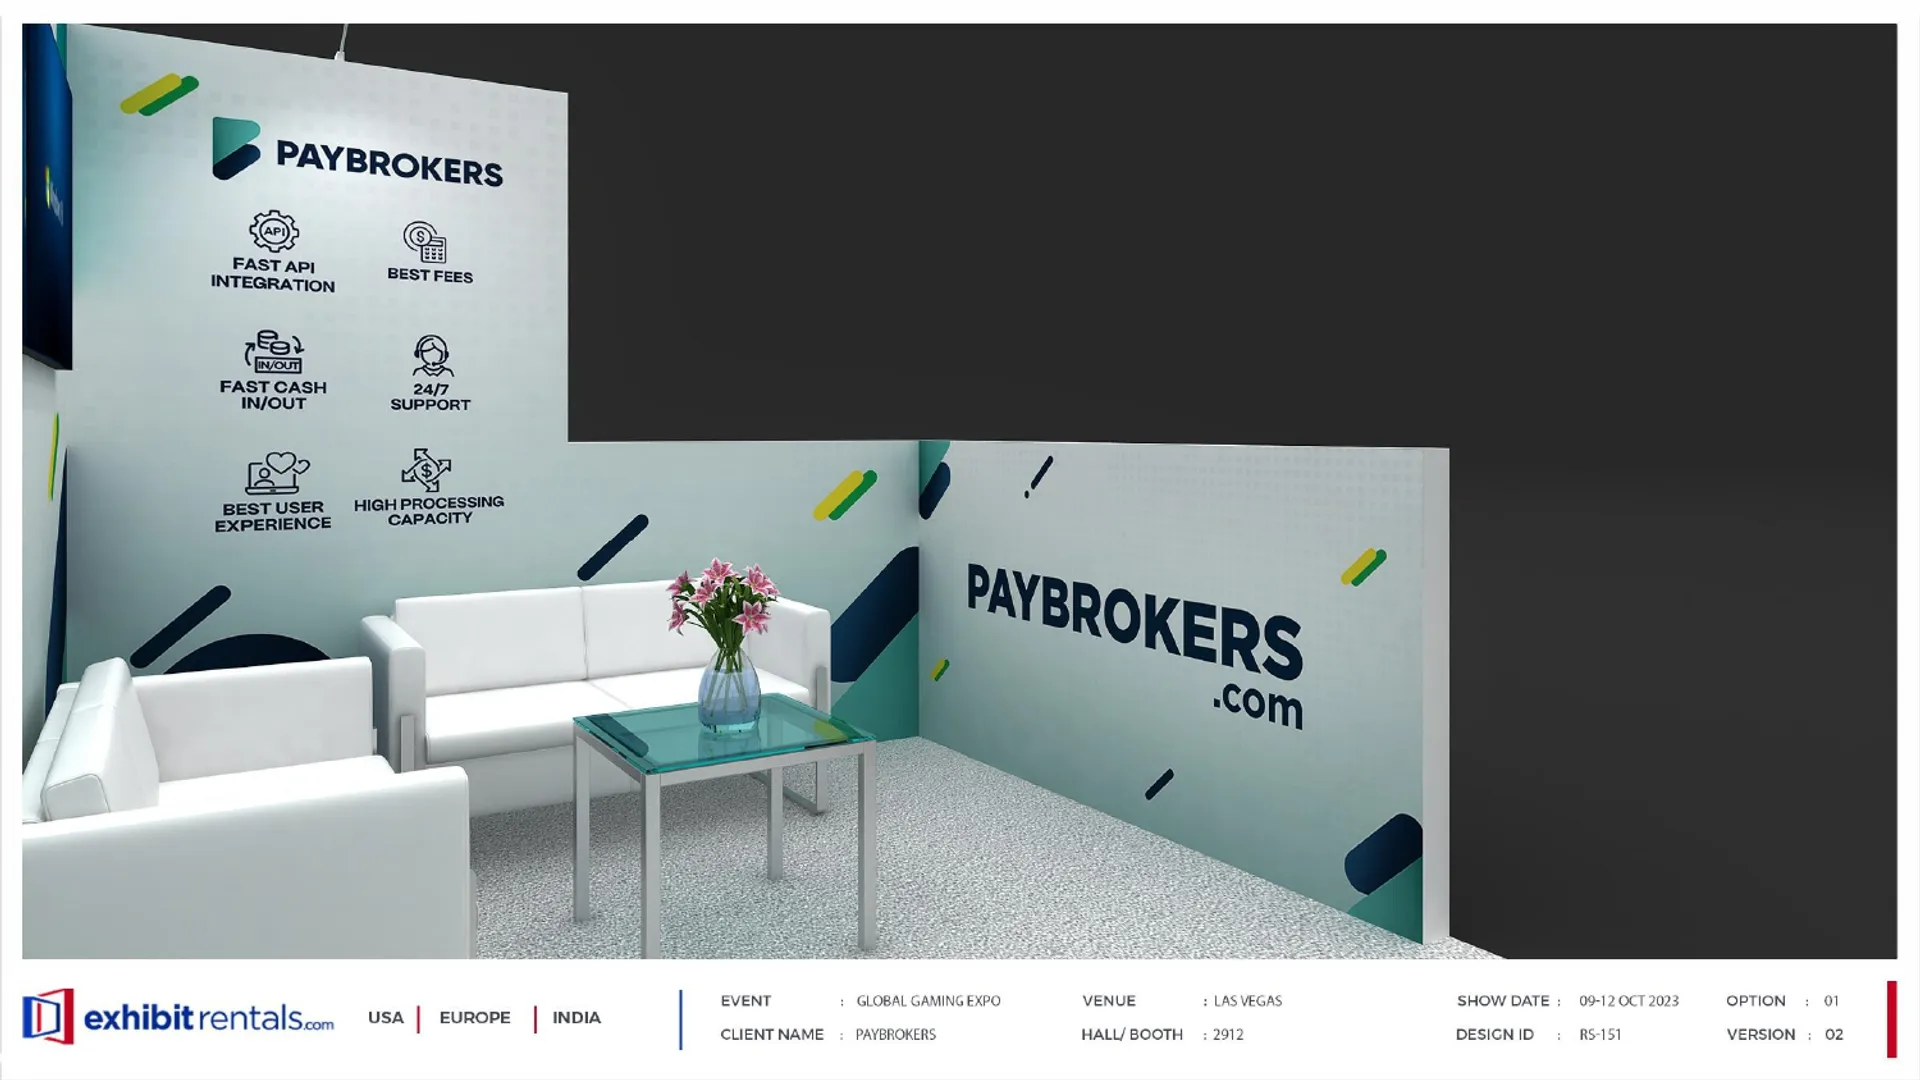 booth-design-projects/Exhibit-Rentals/2024-04-18-10x20-INLINE-Project-103/1.2 - Paybrokers - ER Design Presentation.pptx-17_page-0001-lbvsvw.jpg